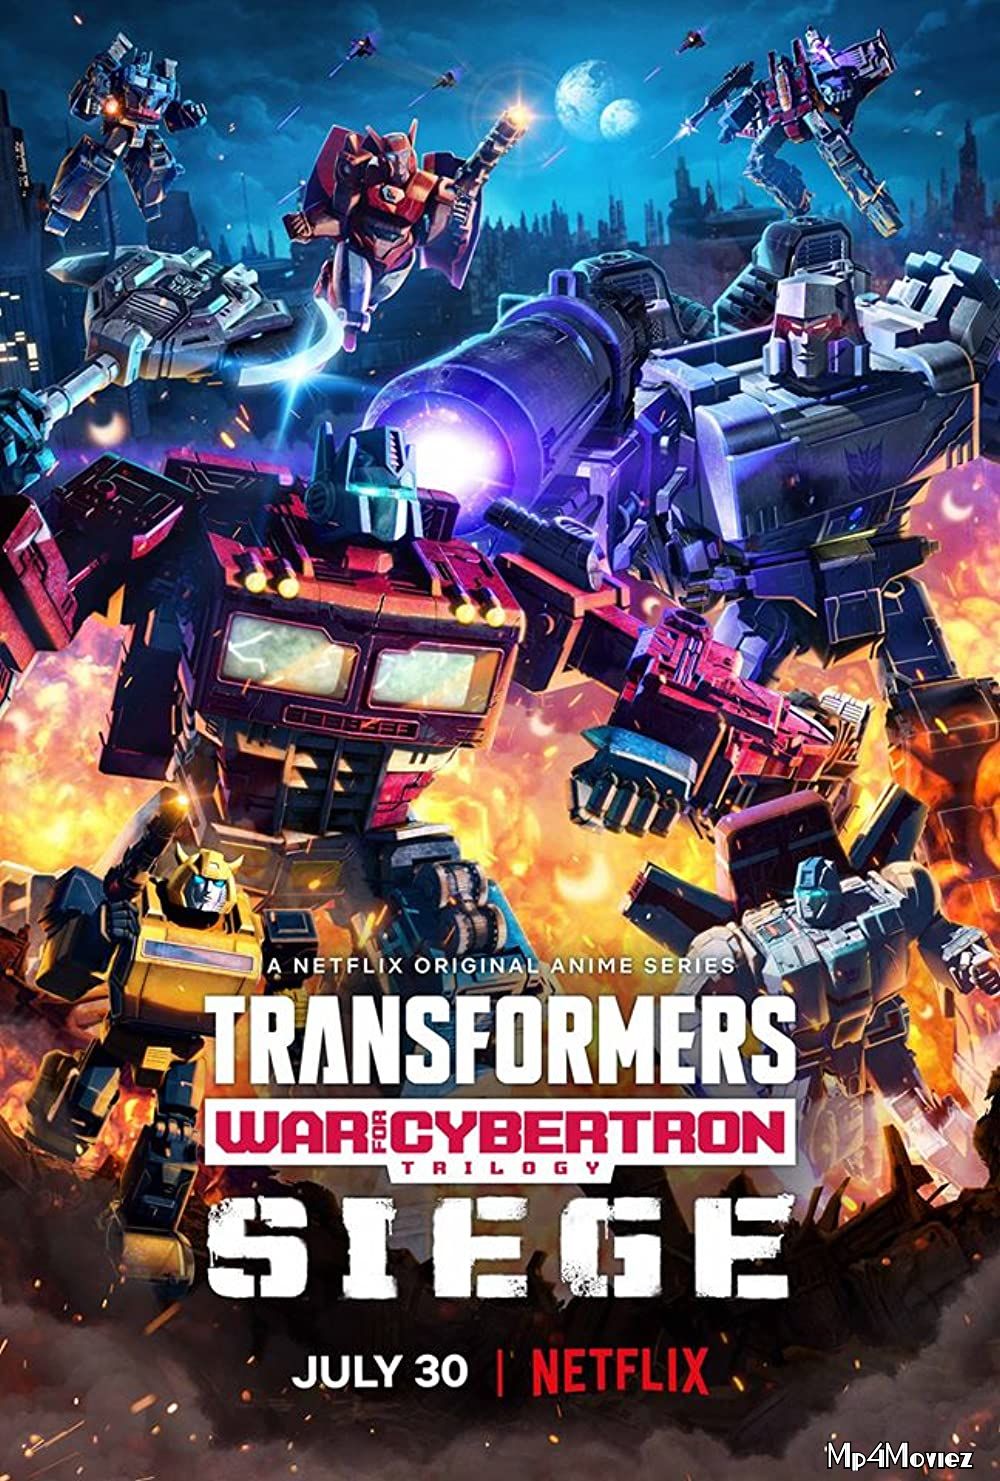 Transformers War for Cybertron Kingdom (2021) S01 Hindi Dubbed Complete NF Series download full movie